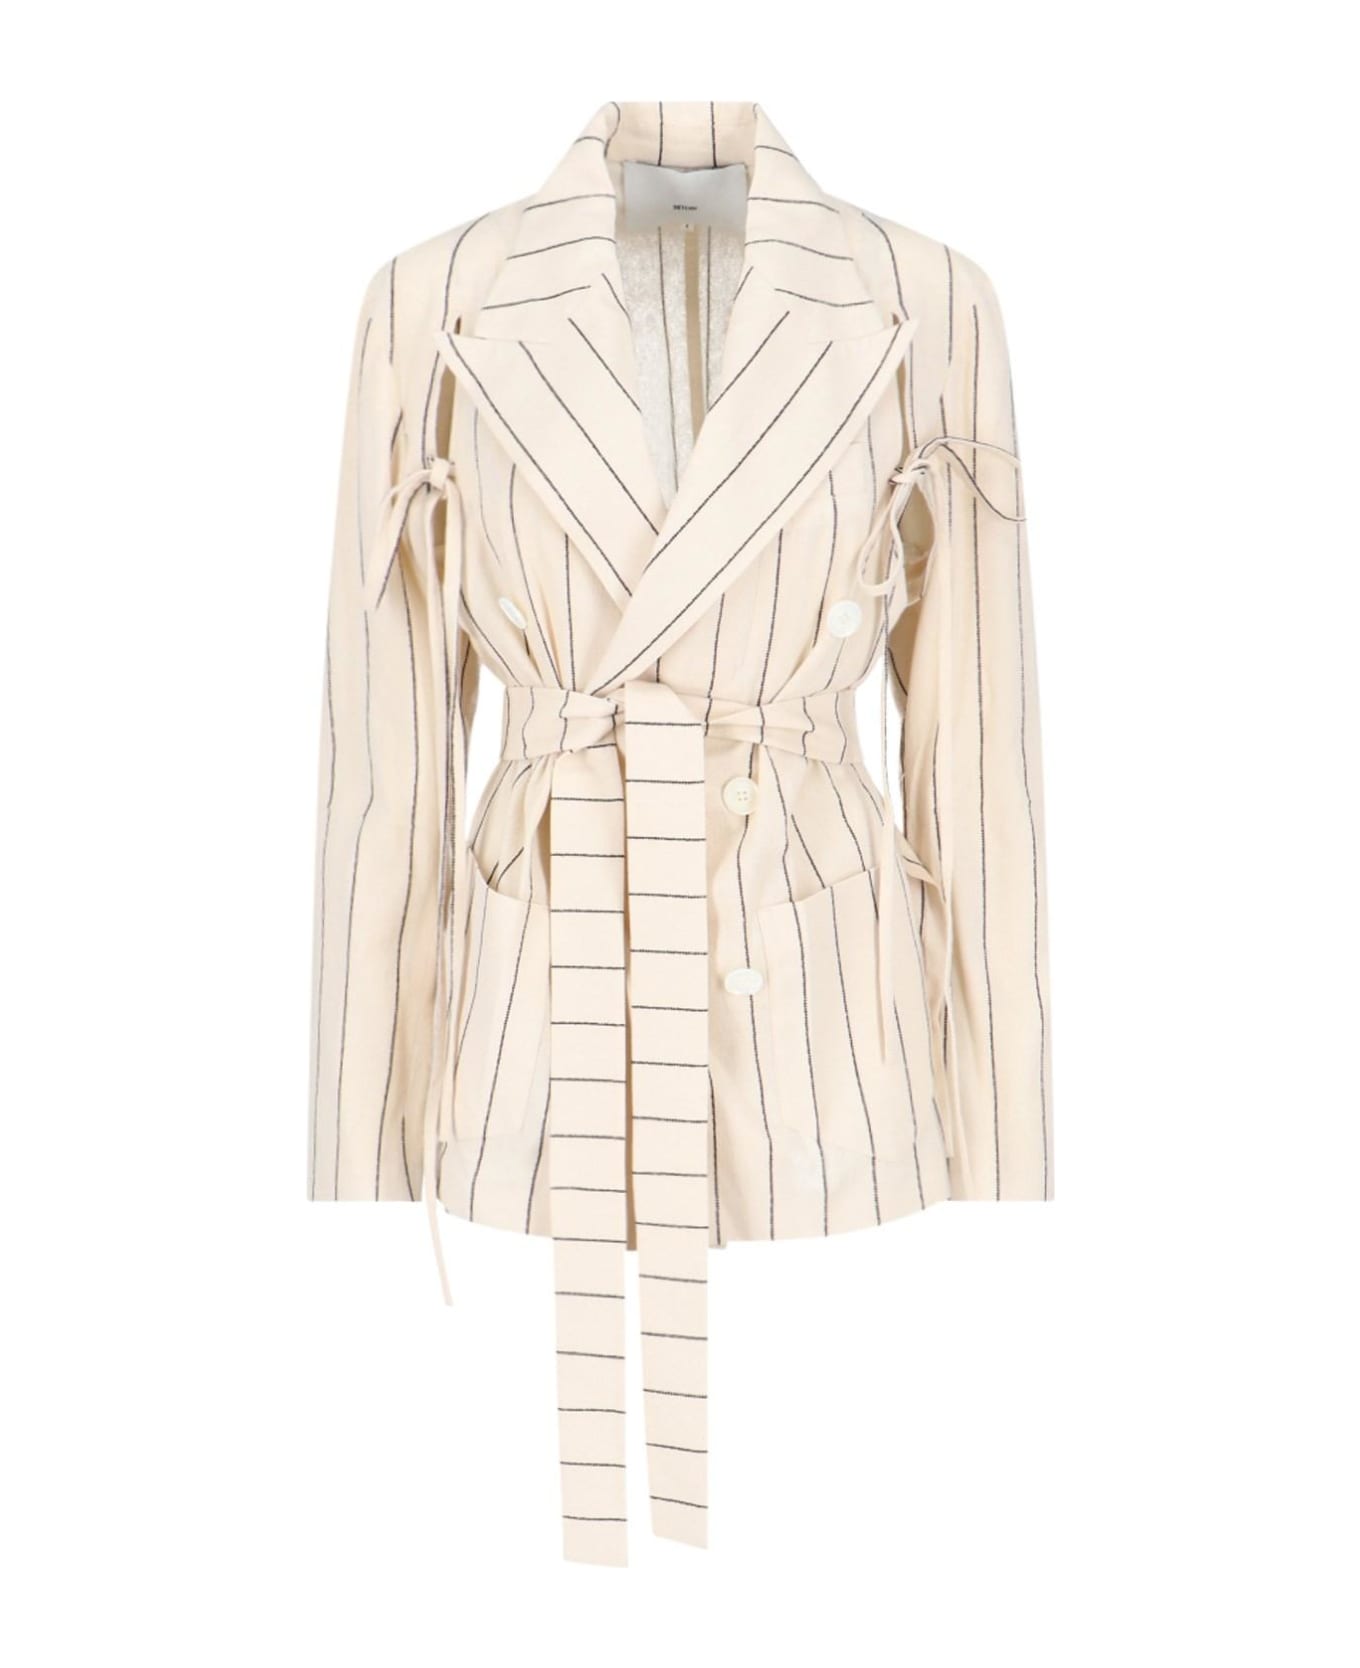 Setchu Pinstriped Double-breasted Blazer - Beige